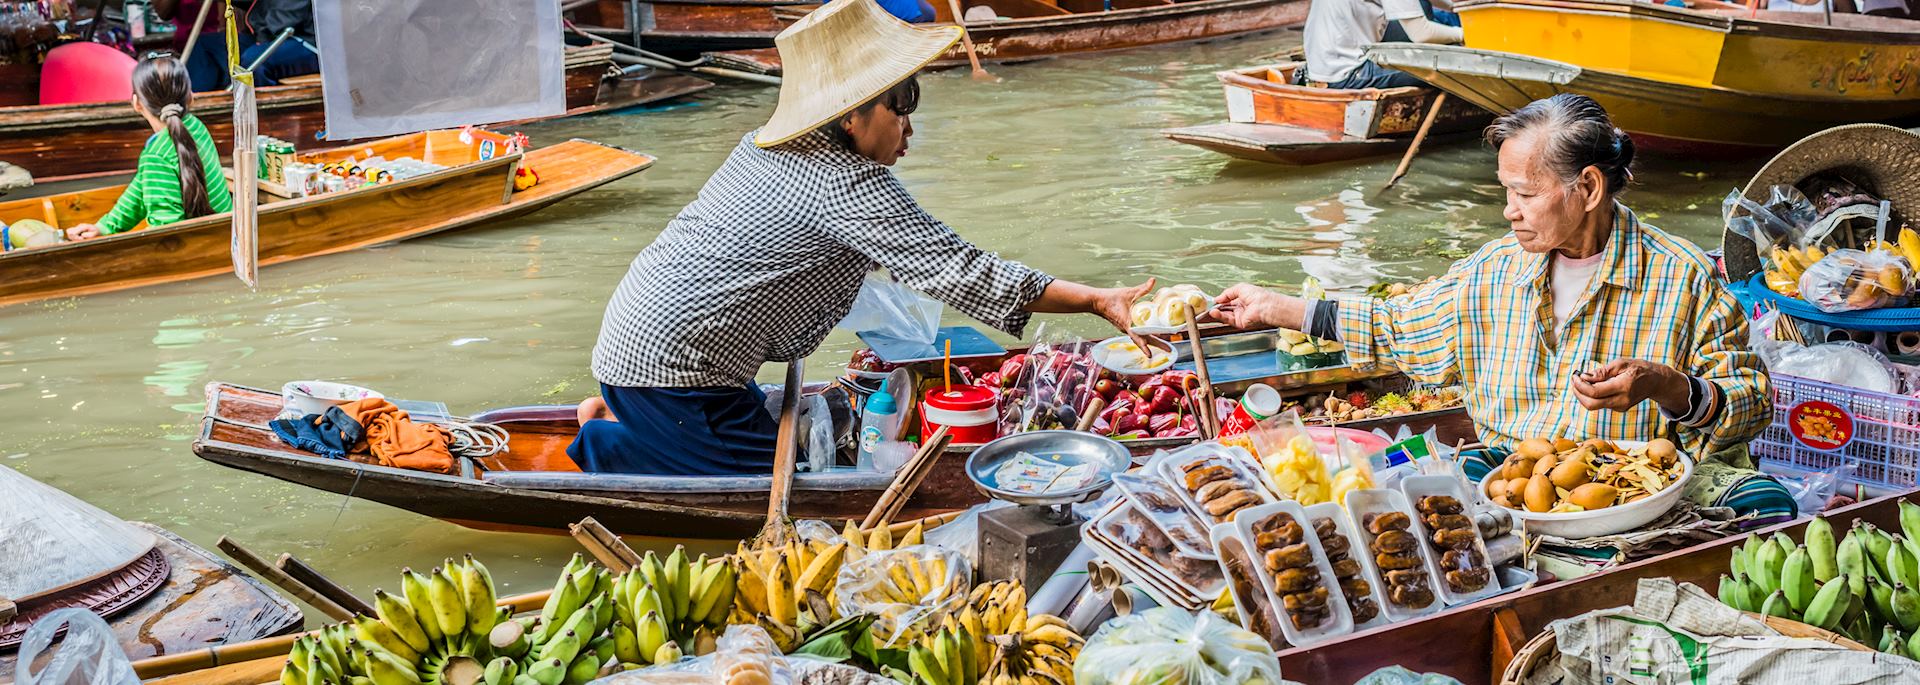 Floating market in Amphawa